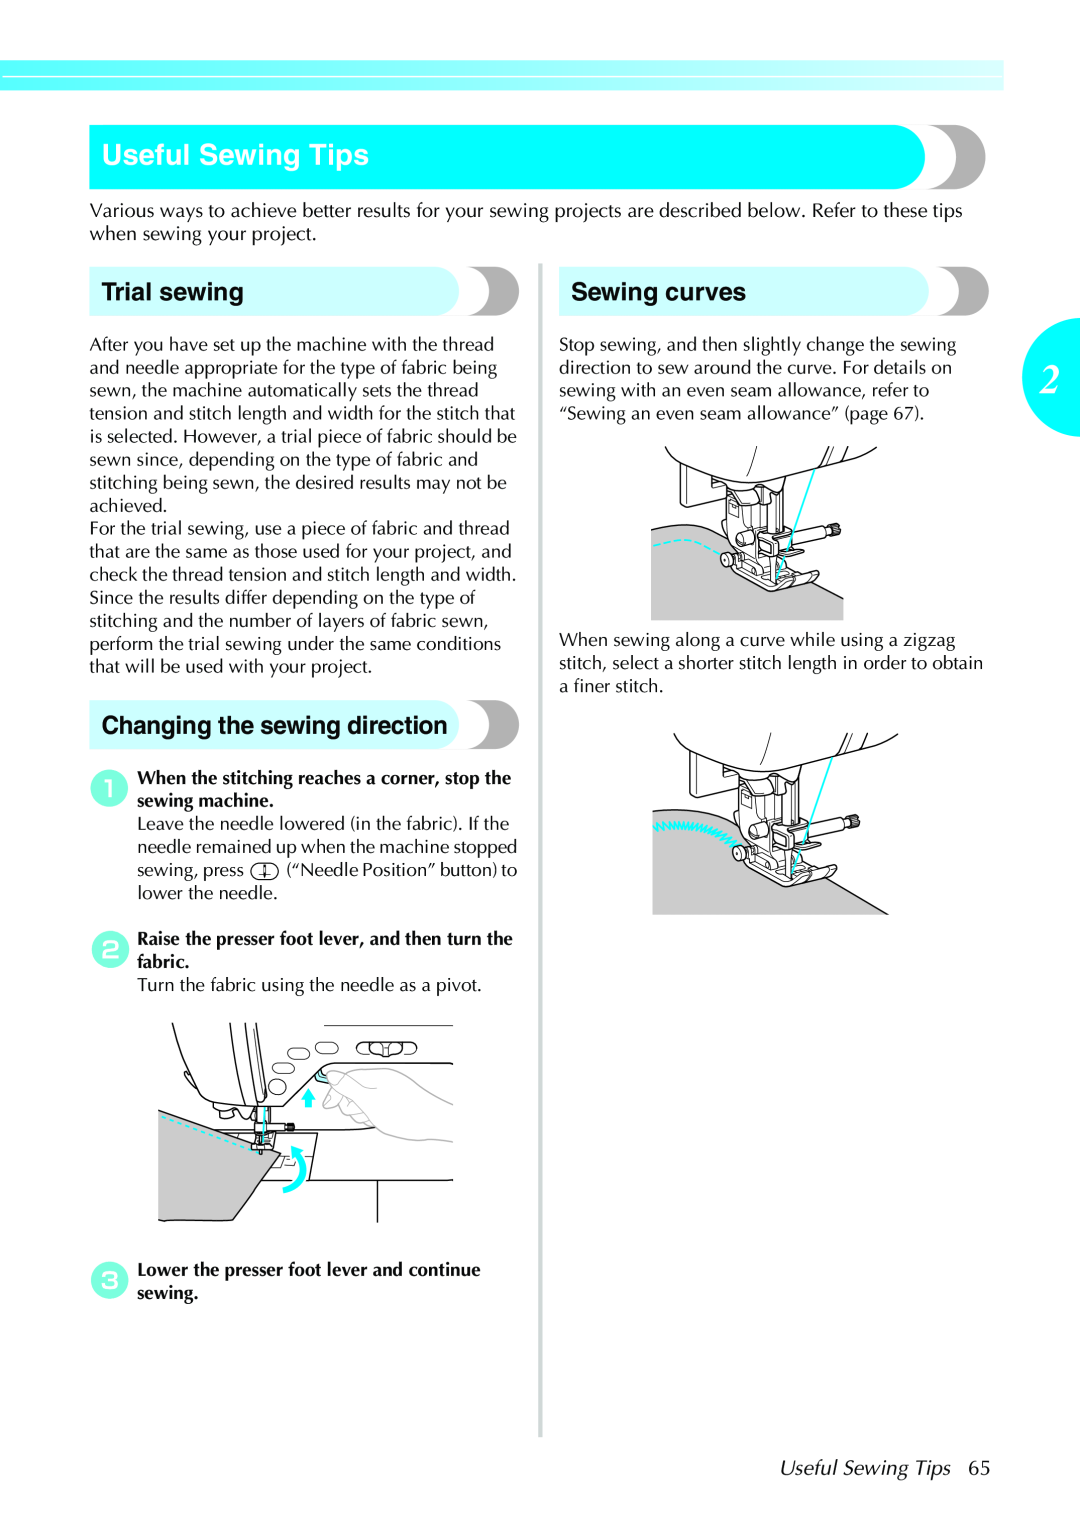 Brother NX-450, N5V operation manual Useful Sewing Tips, Trial sewing, Changing the sewing direction, Sewing curves 